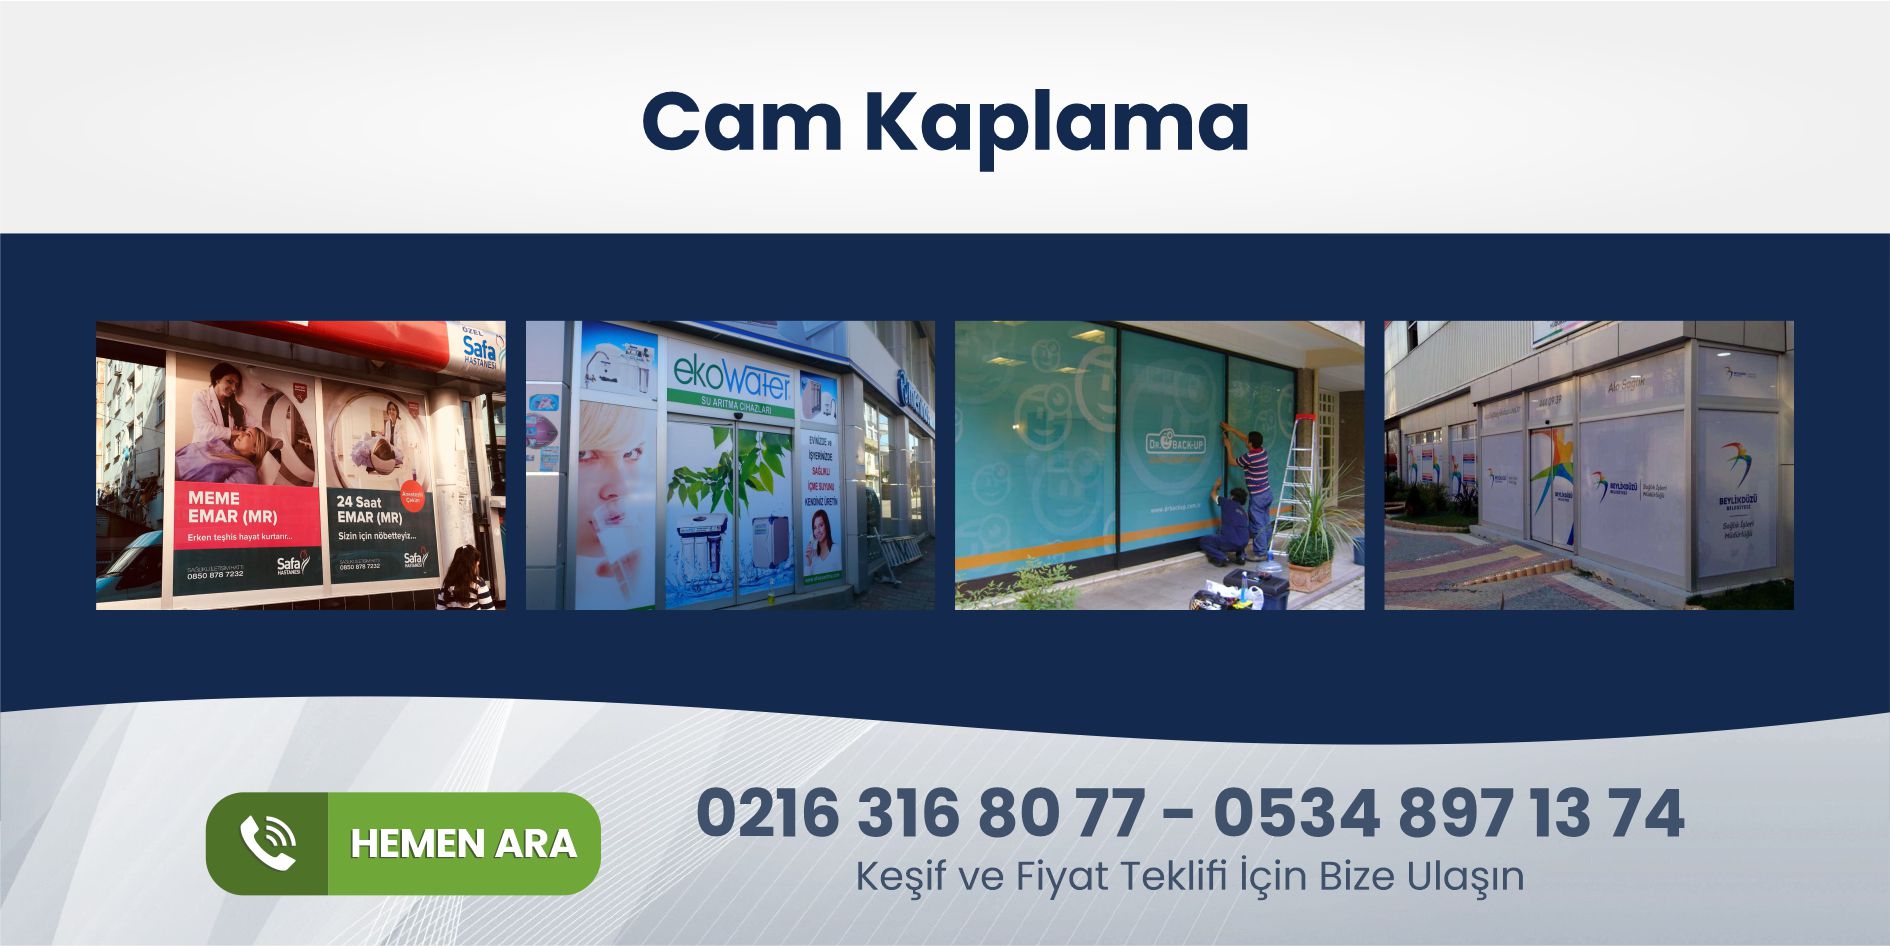 You are currently viewing Tuzla One Way Vision Cam Kaplama